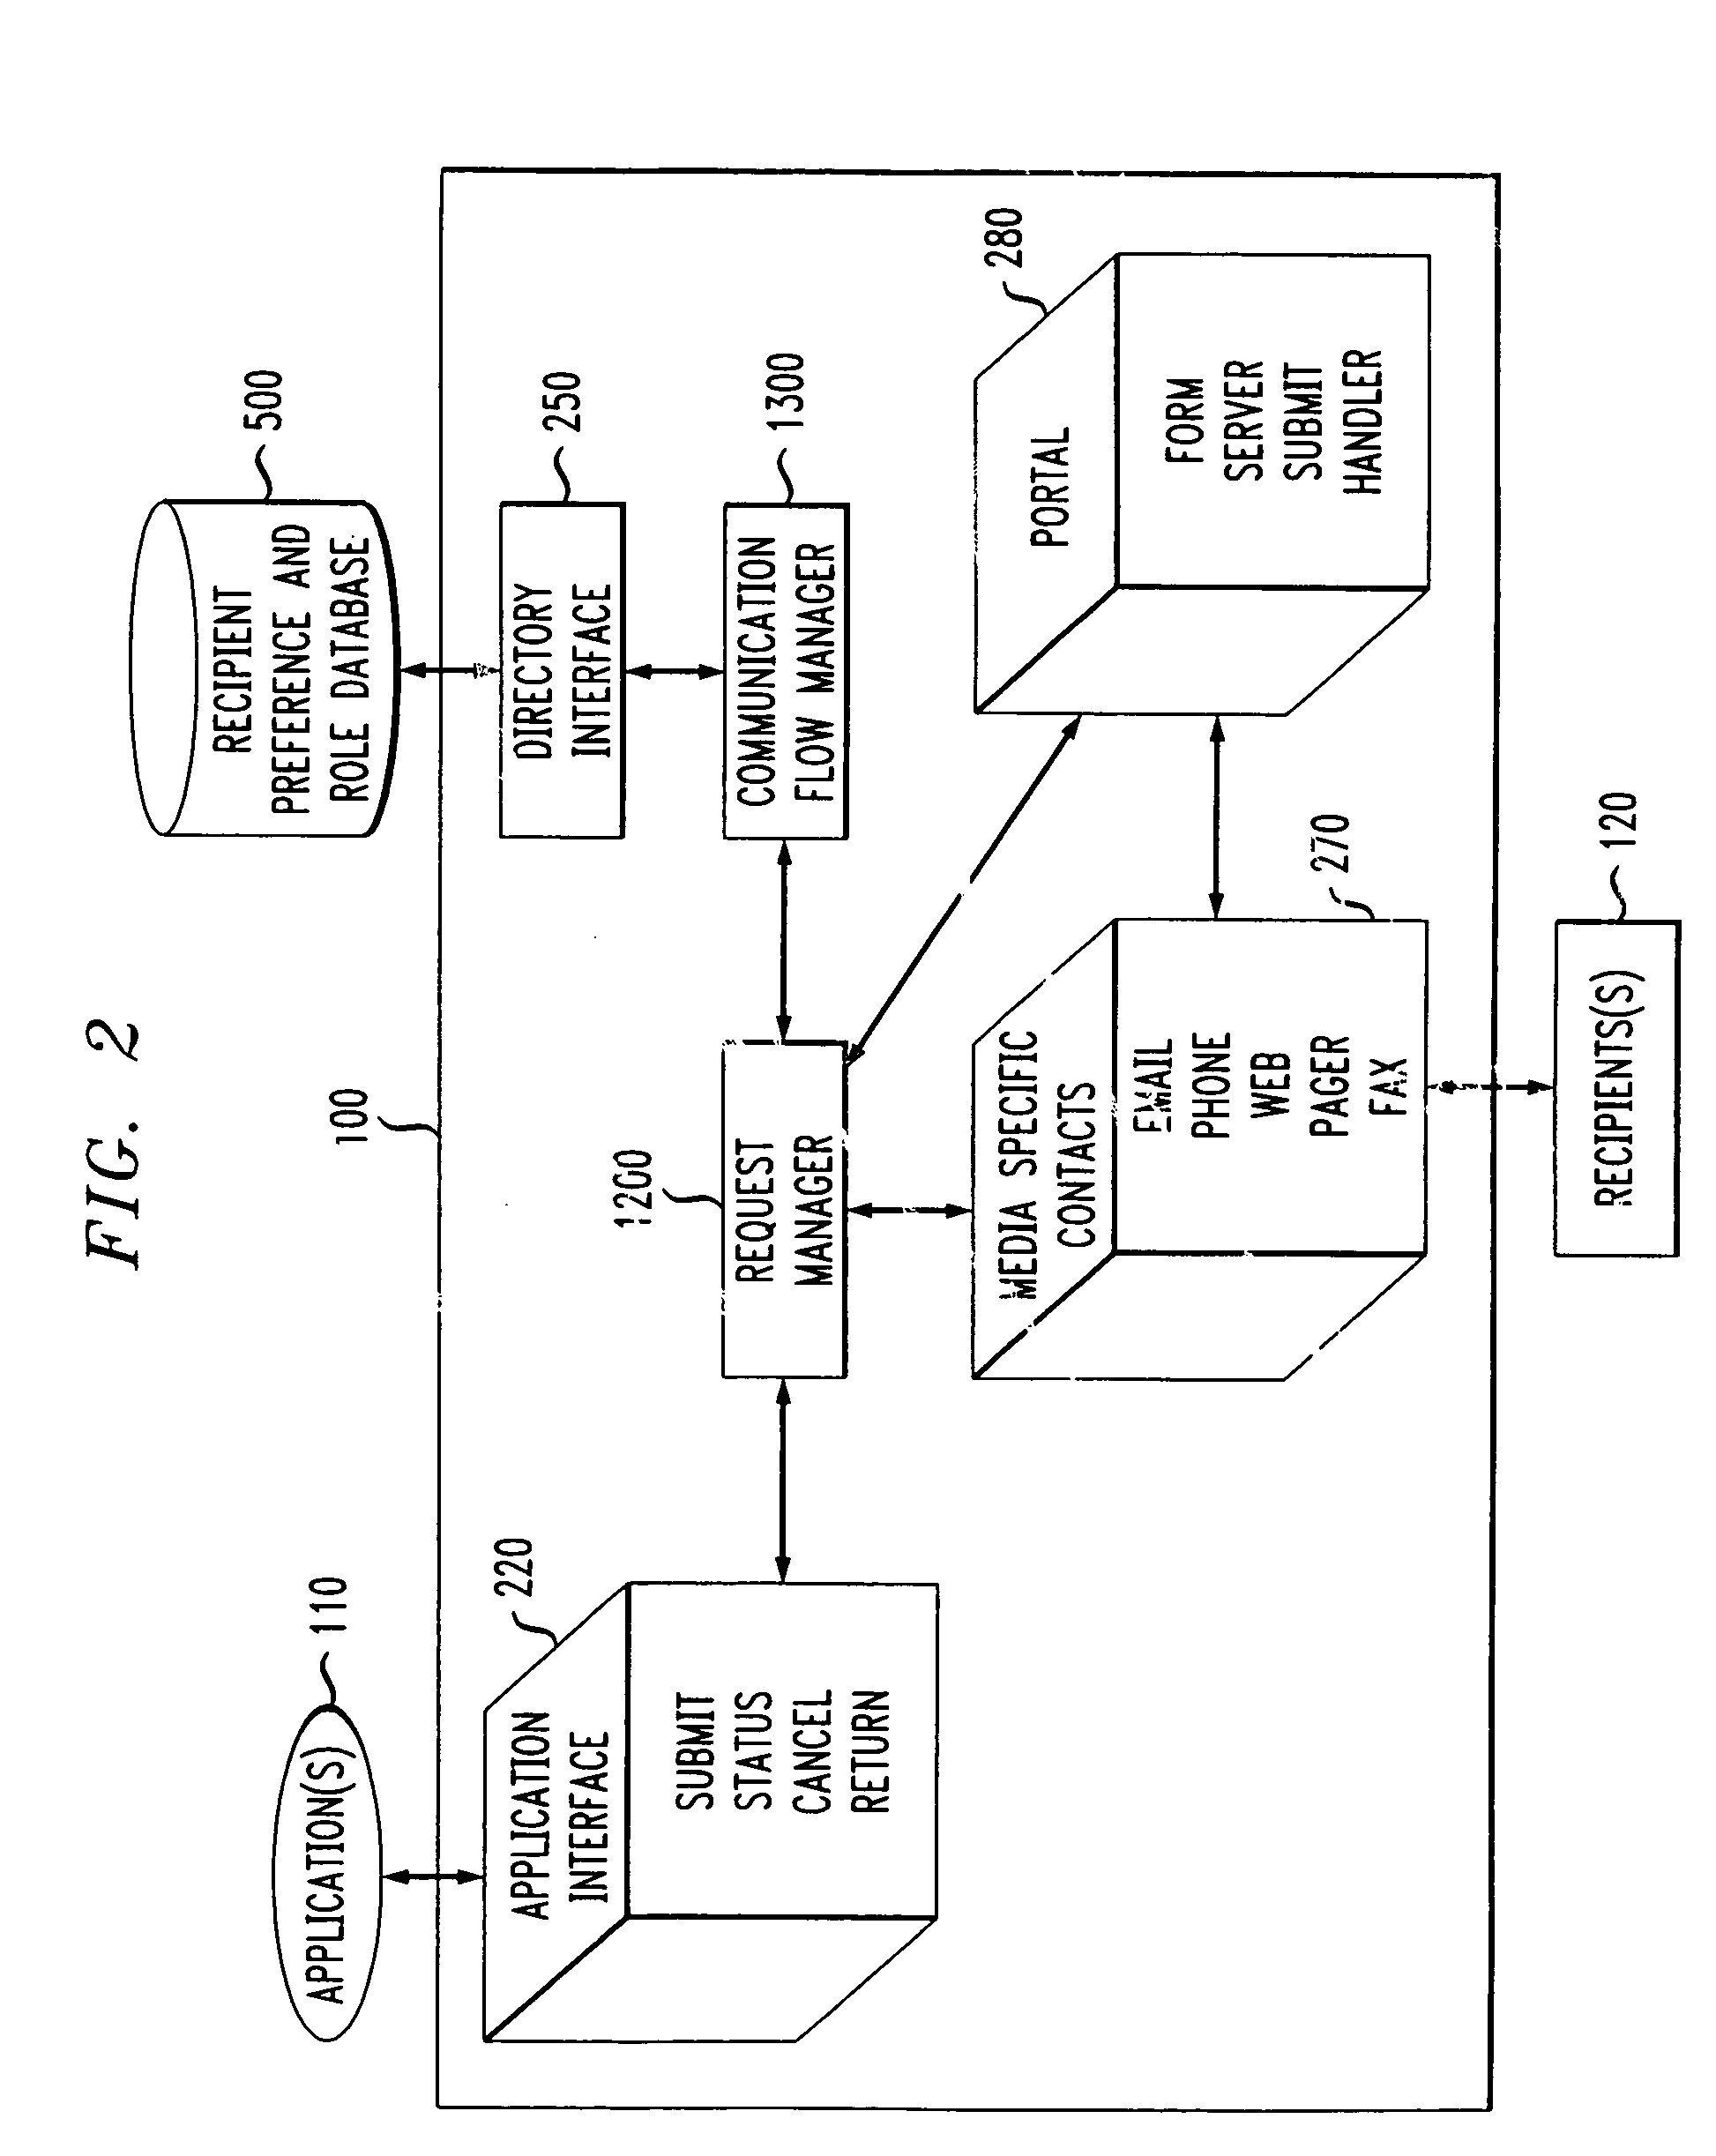 Method and apparatus for automatic notification and response based on communication flow expressions